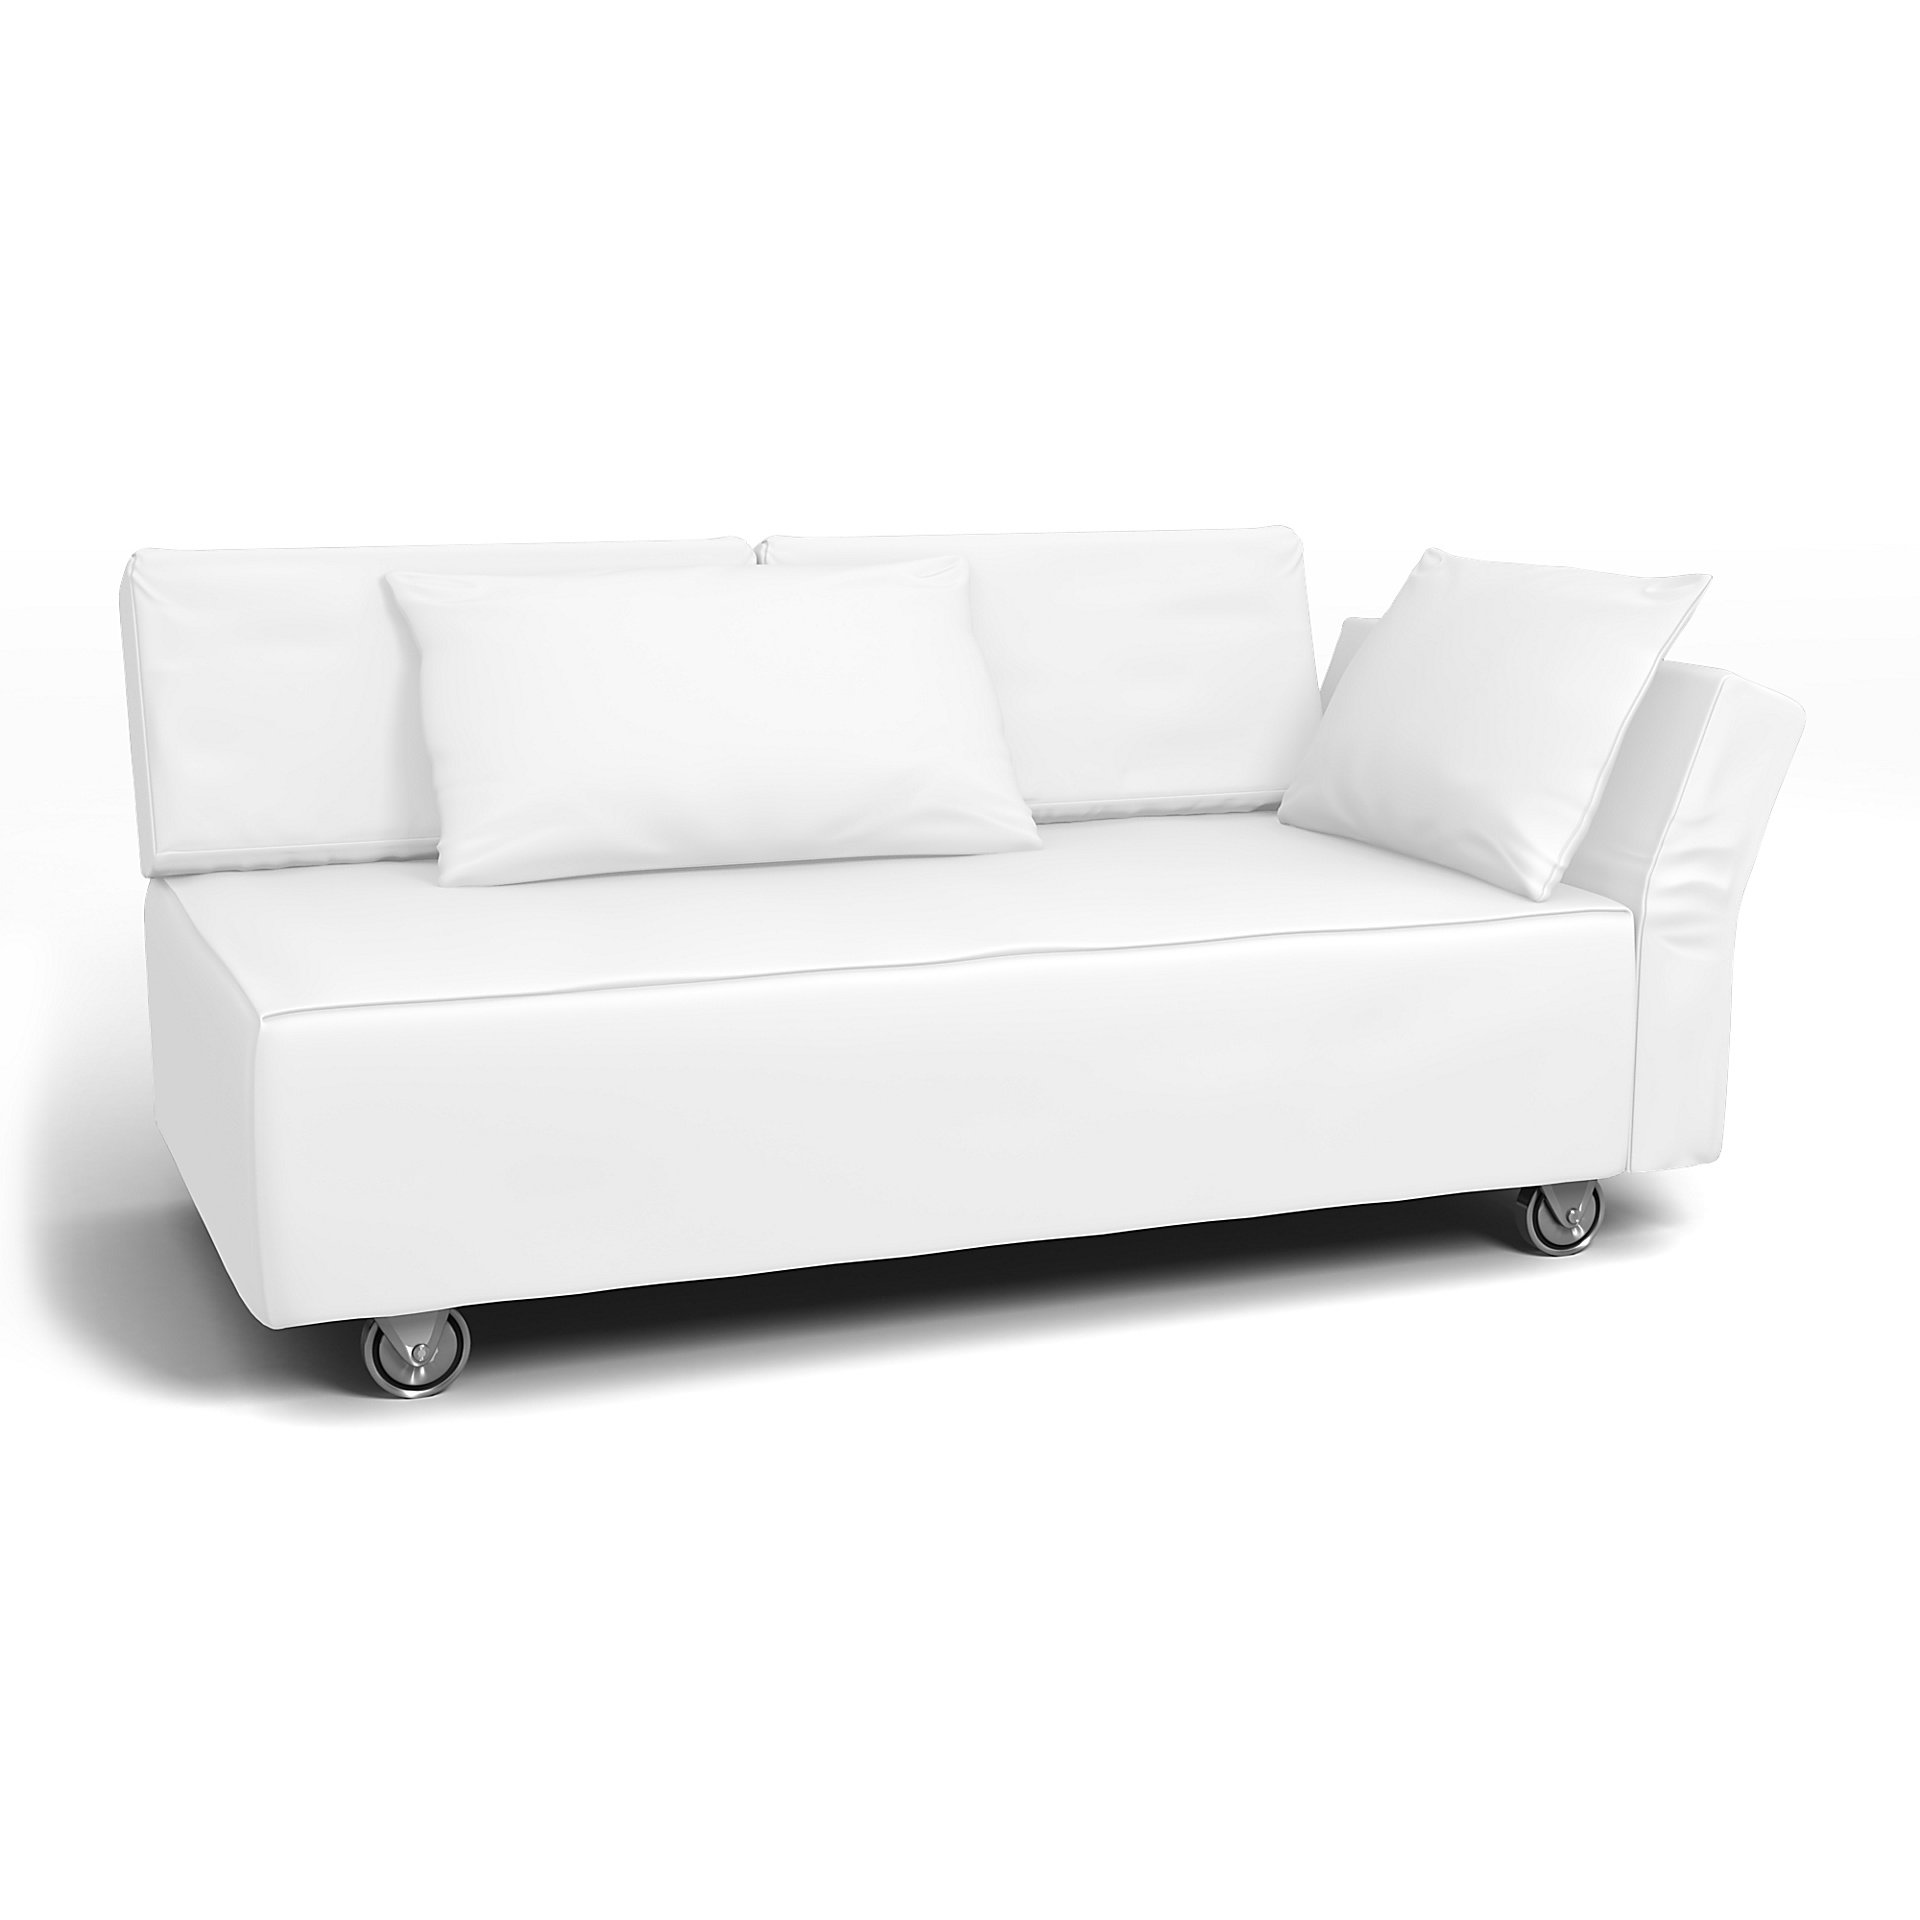 IKEA - Falsterbo 2 Seat Sofa with Right Arm Cover, Absolute White, Linen - Bemz